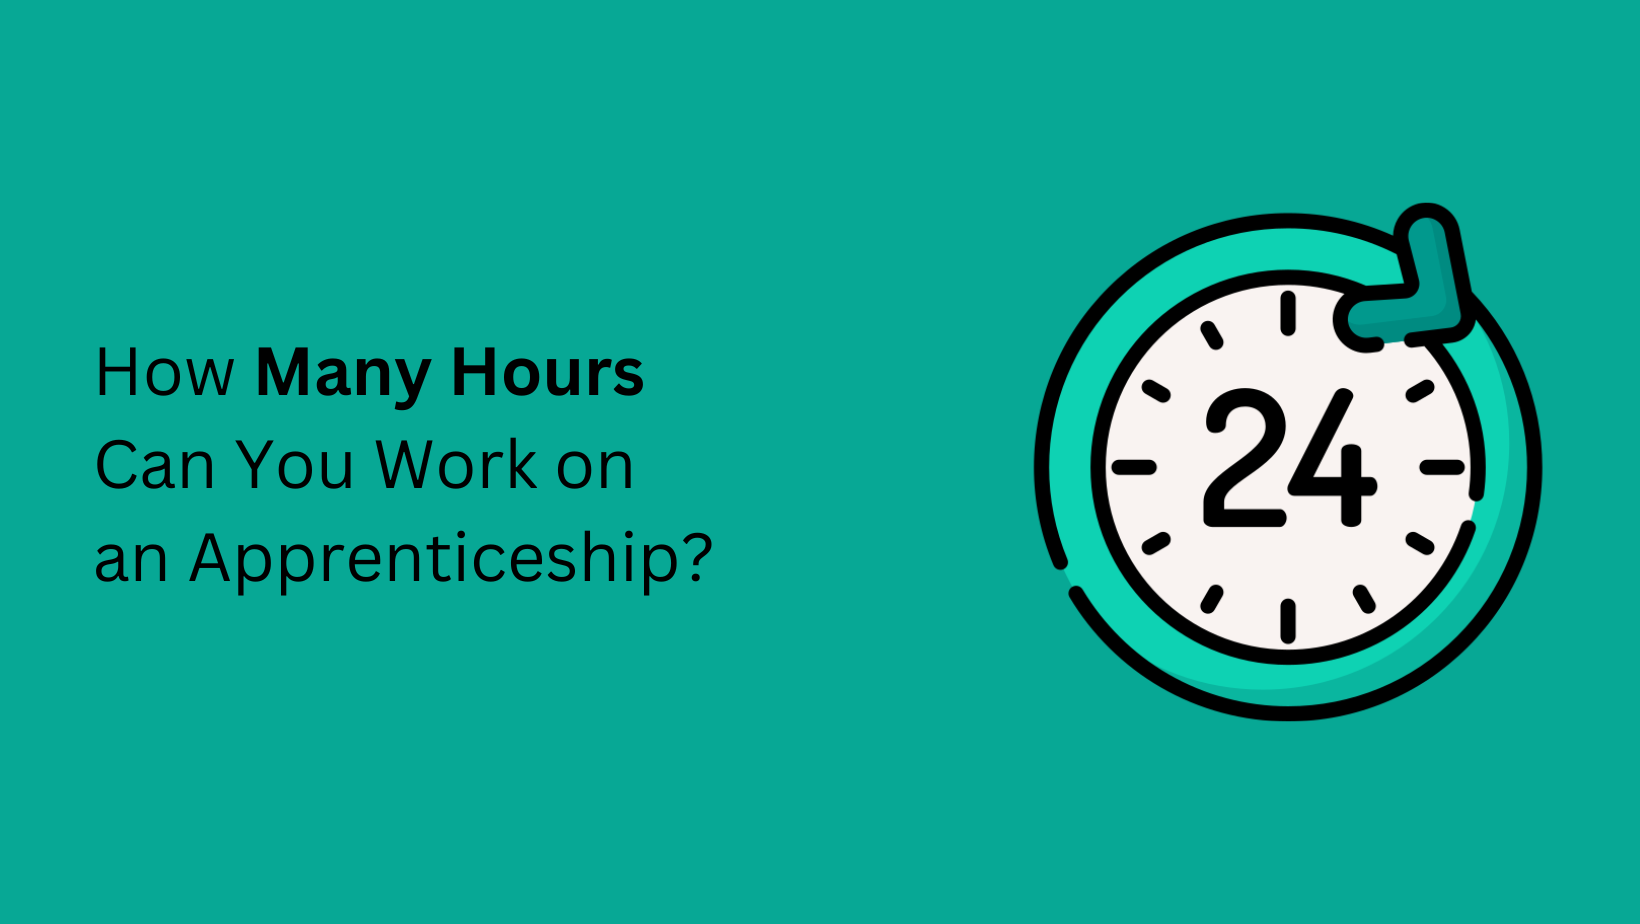 How Many Hours Can You Work on an Apprenticeship